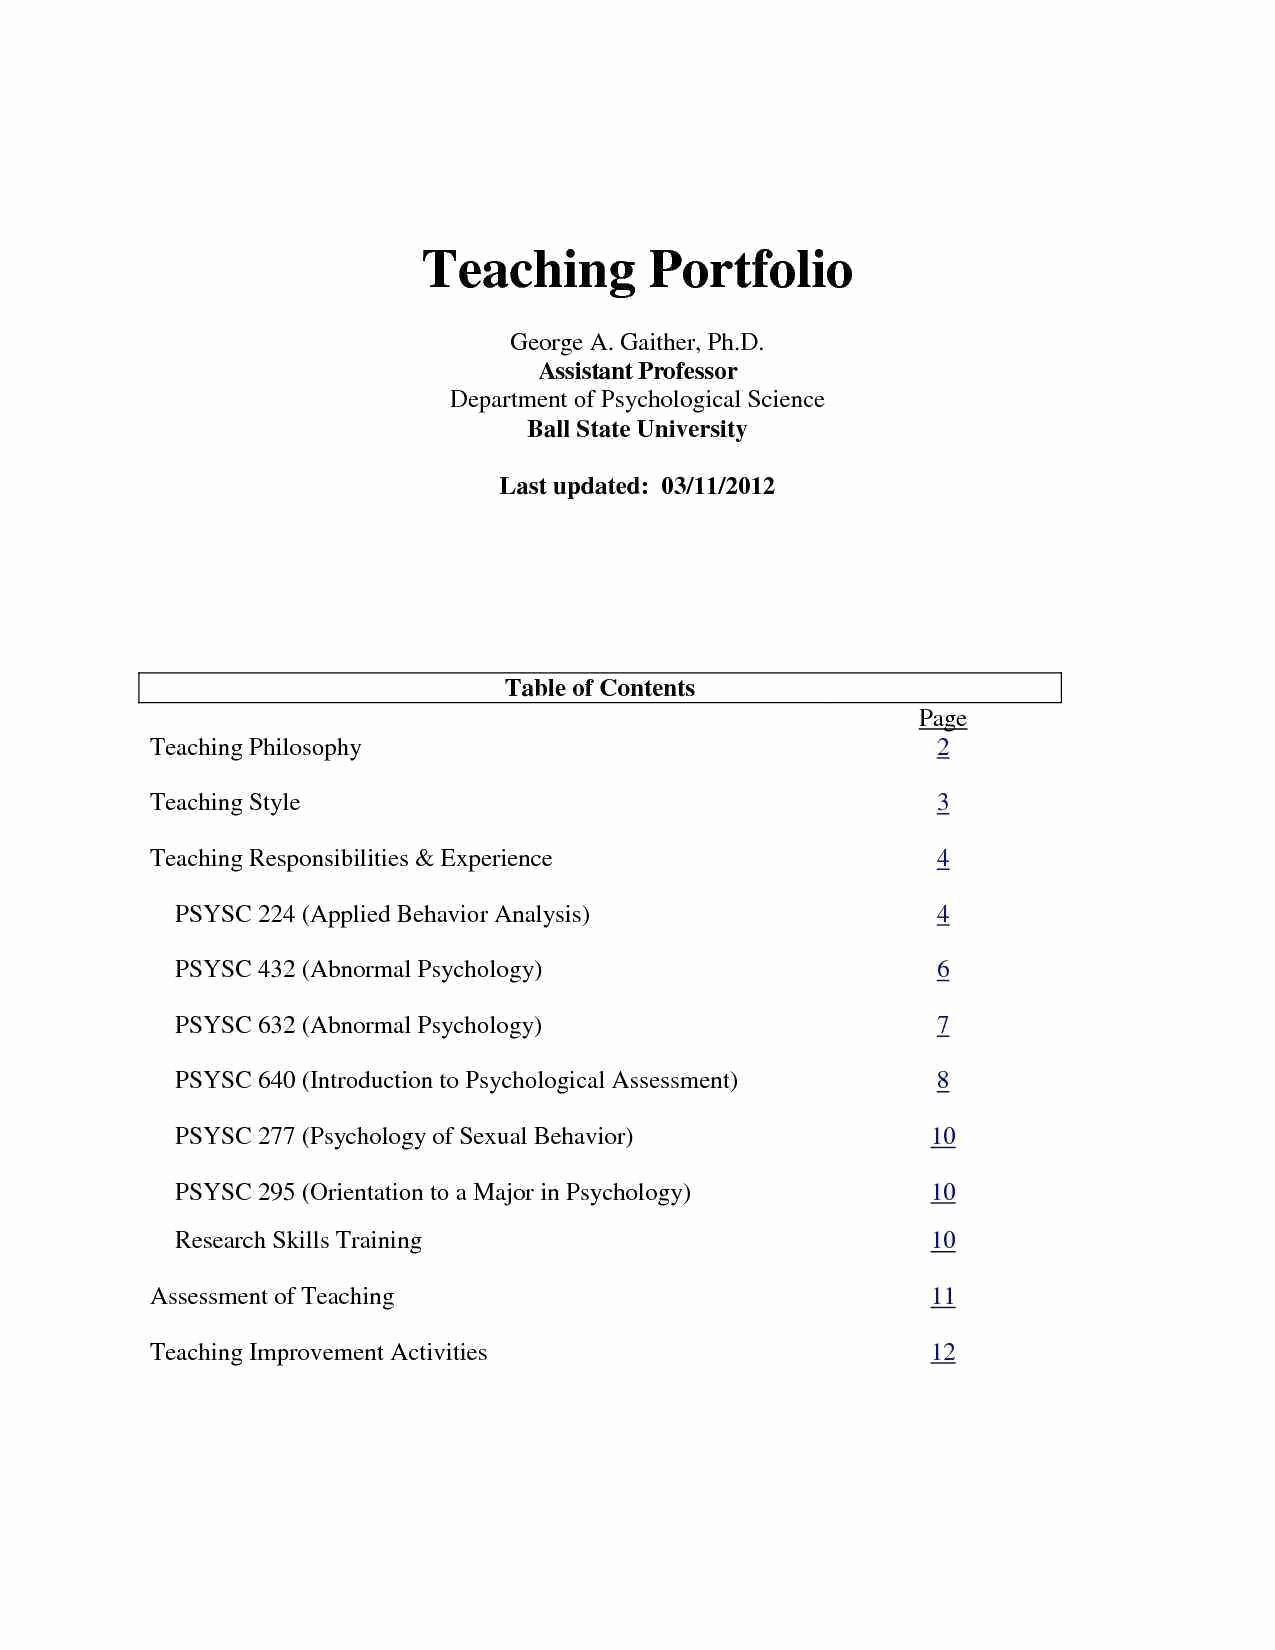 Portfolio Table Of Contents Template New Career Portfolio Table Contents Samples New Teaching